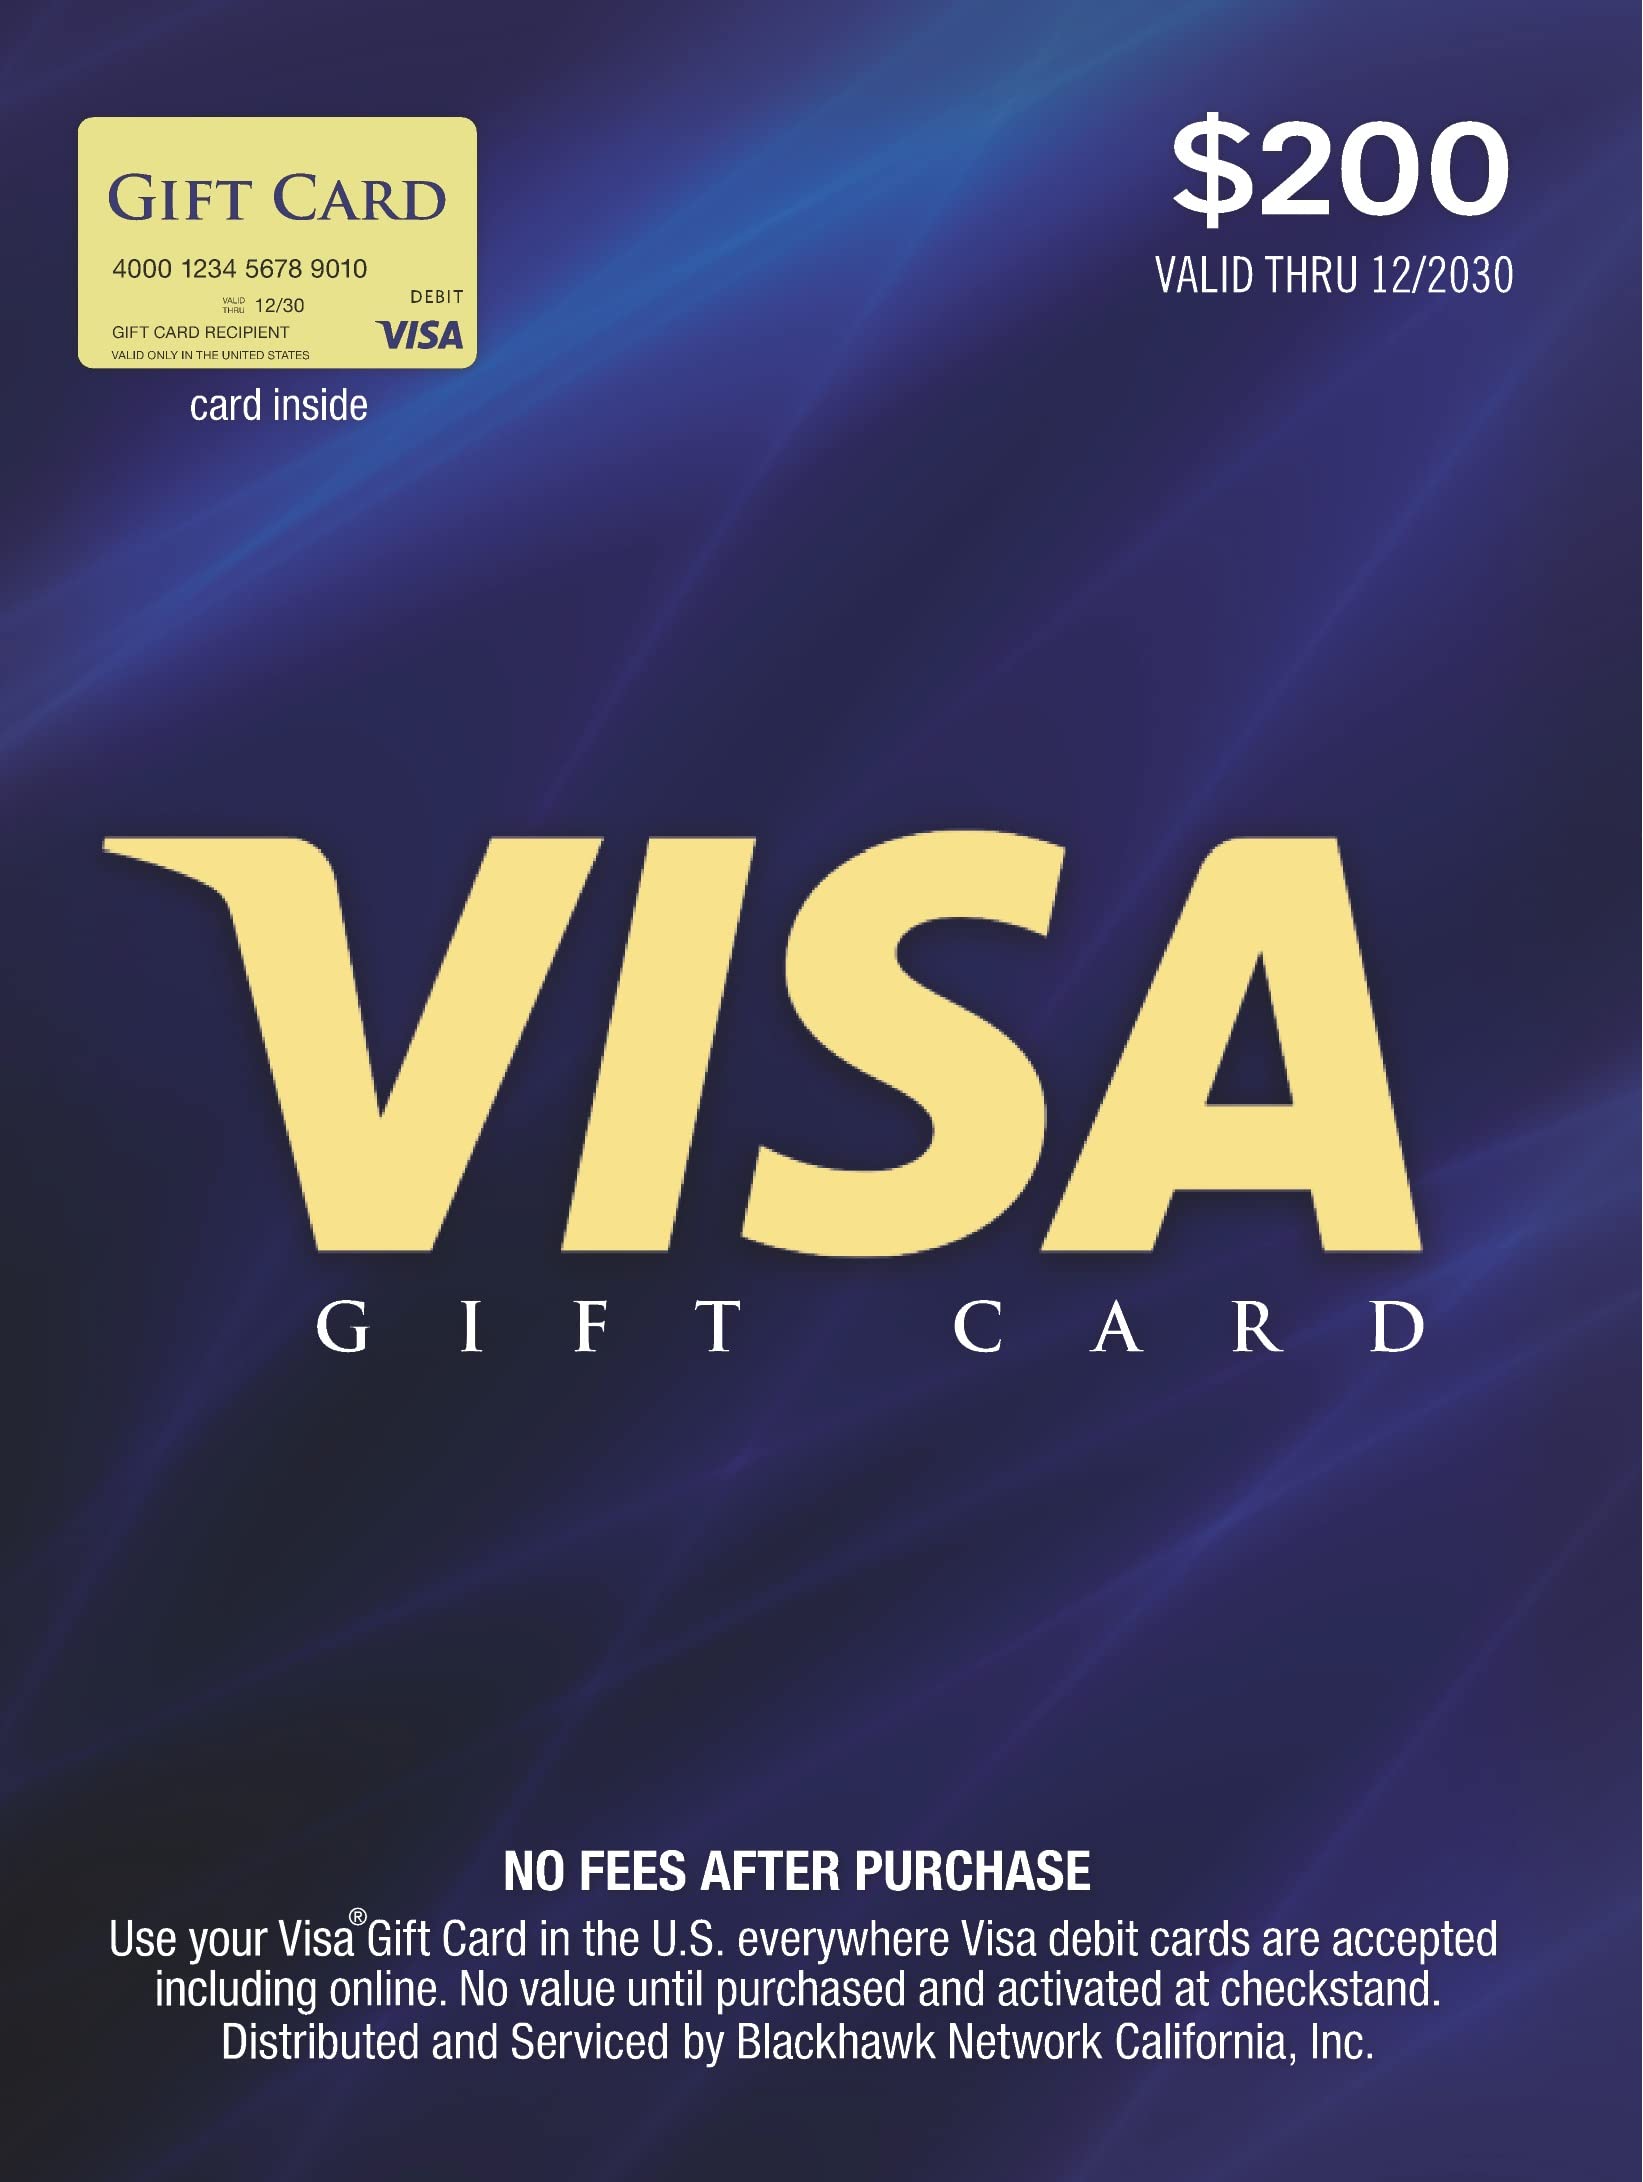 At staples - No Purchase Fee when you buy a $200 Visa Gift Card in Store Only (a $7.95 value) - Starts from 4/28-5/4 - Limit 8